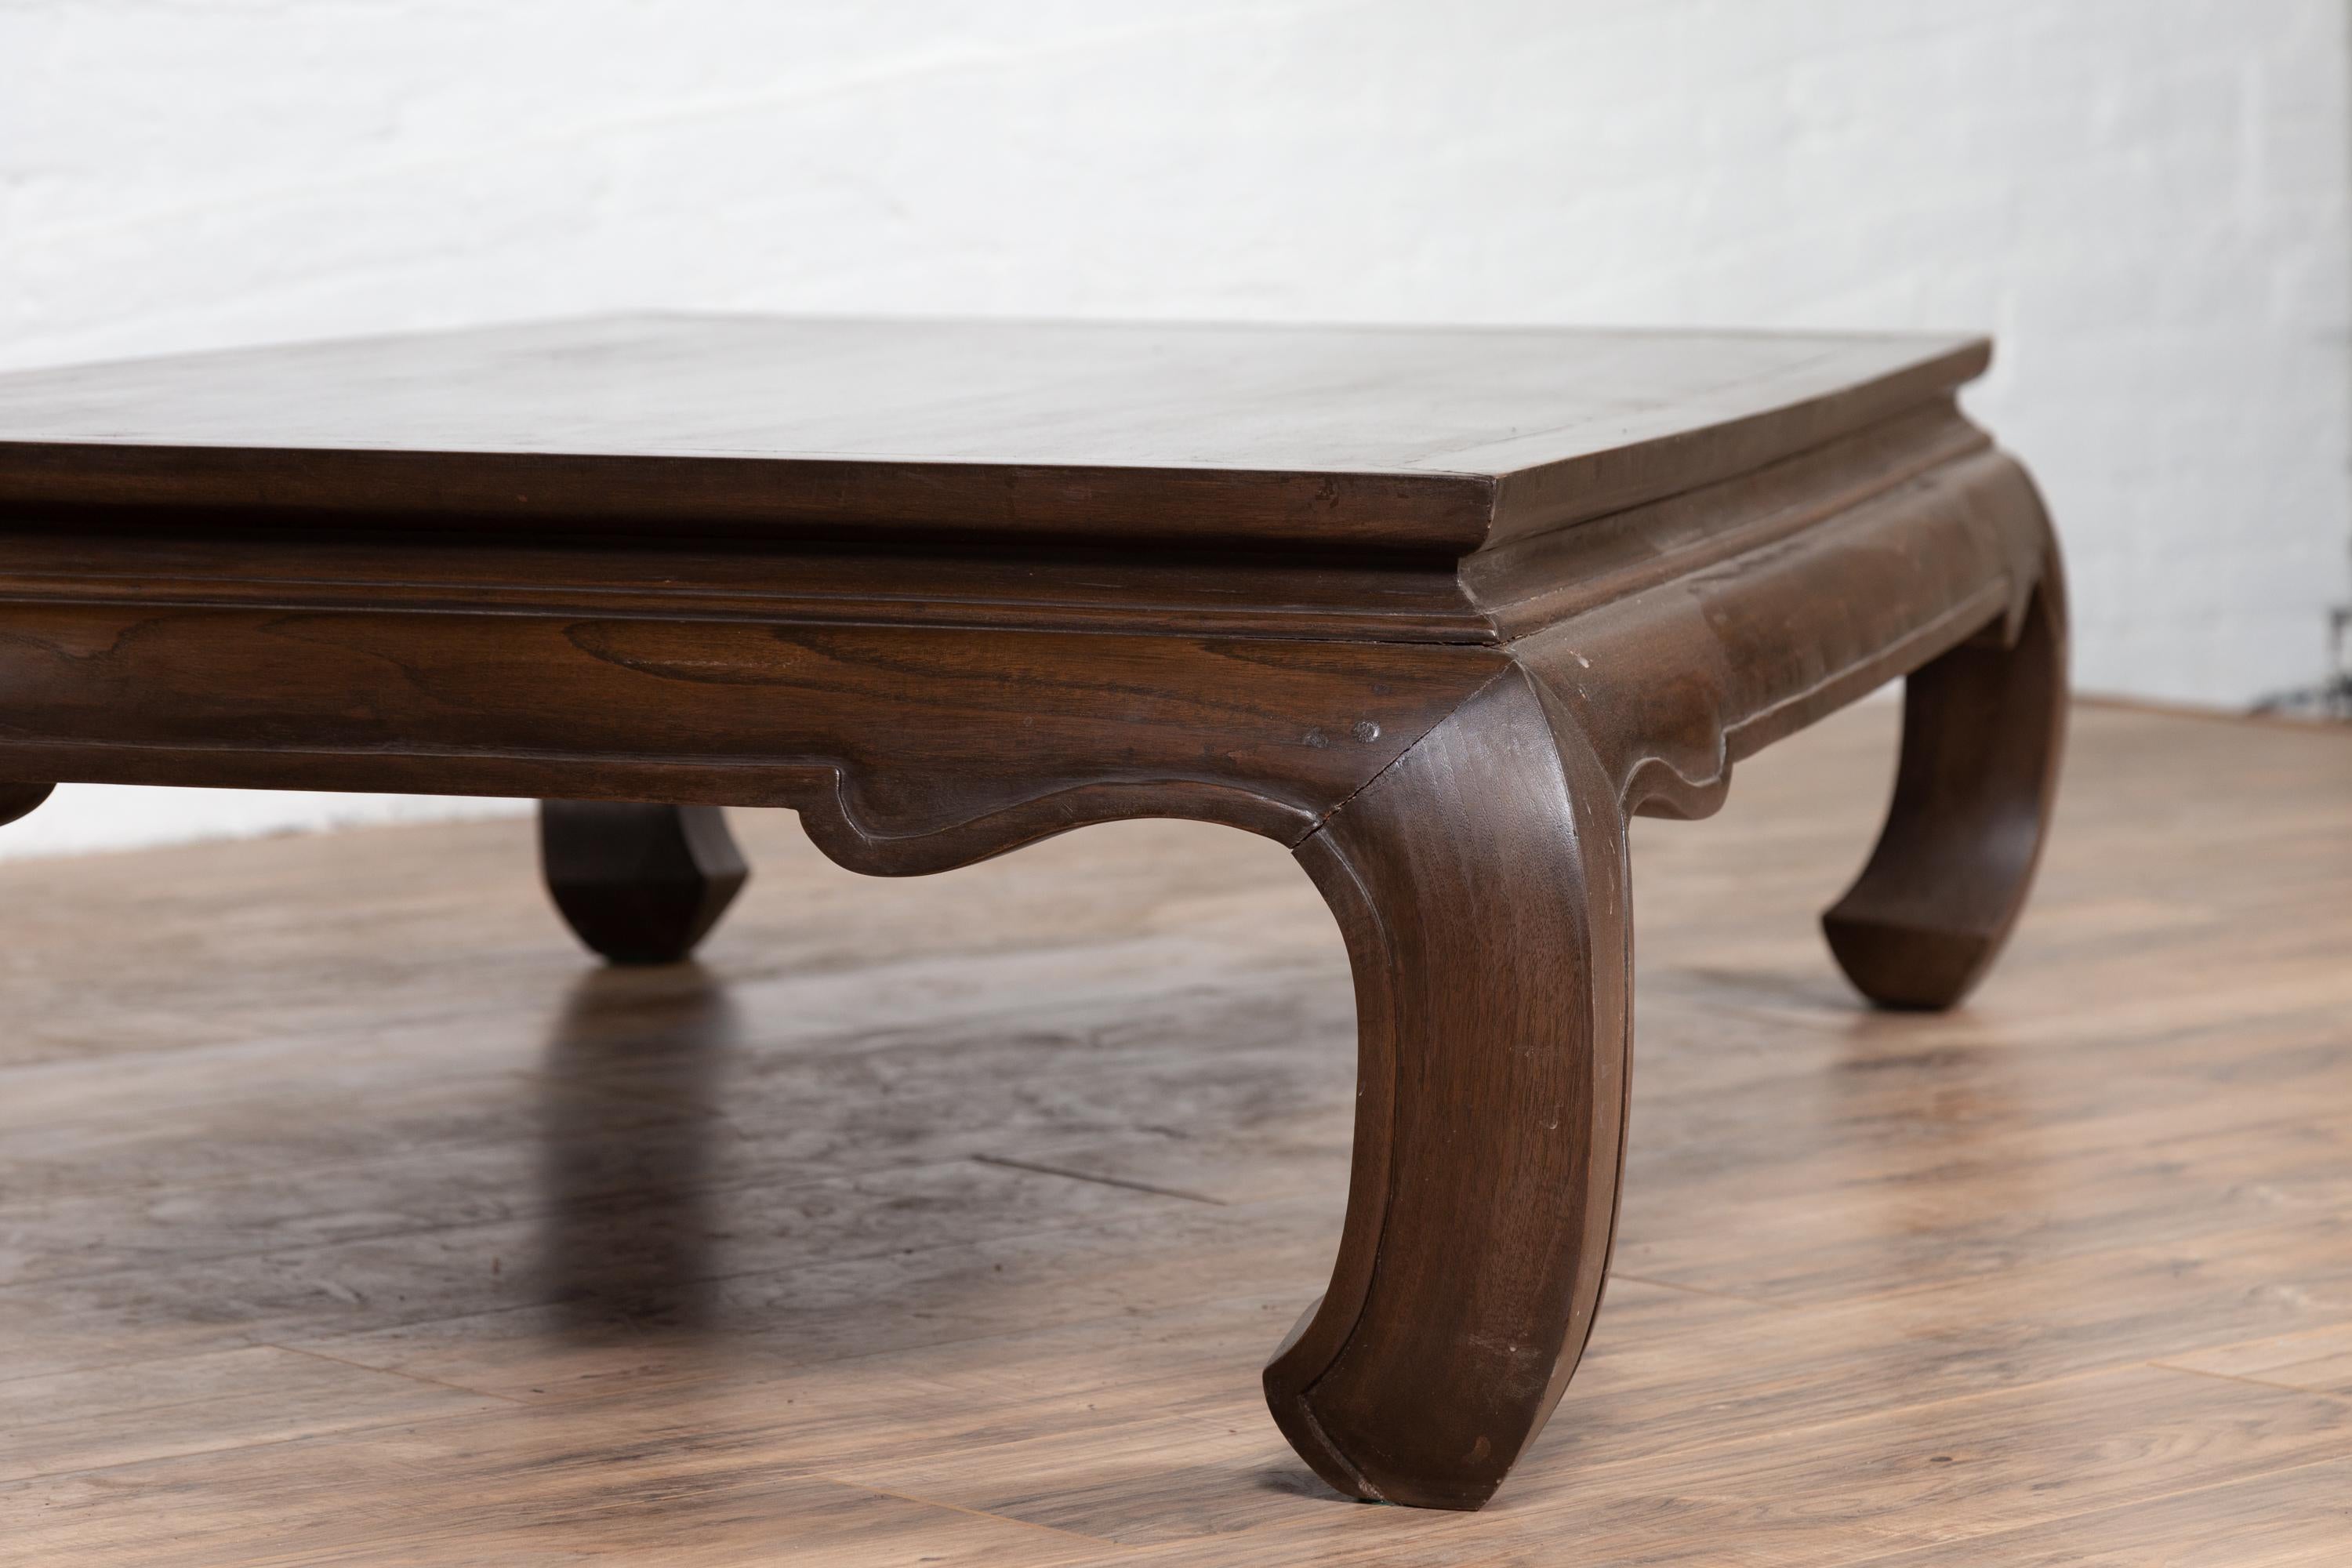 Wood Vintage Thai Opium Bed Style Waisted Coffee Table with Dark Patina and Chow Legs